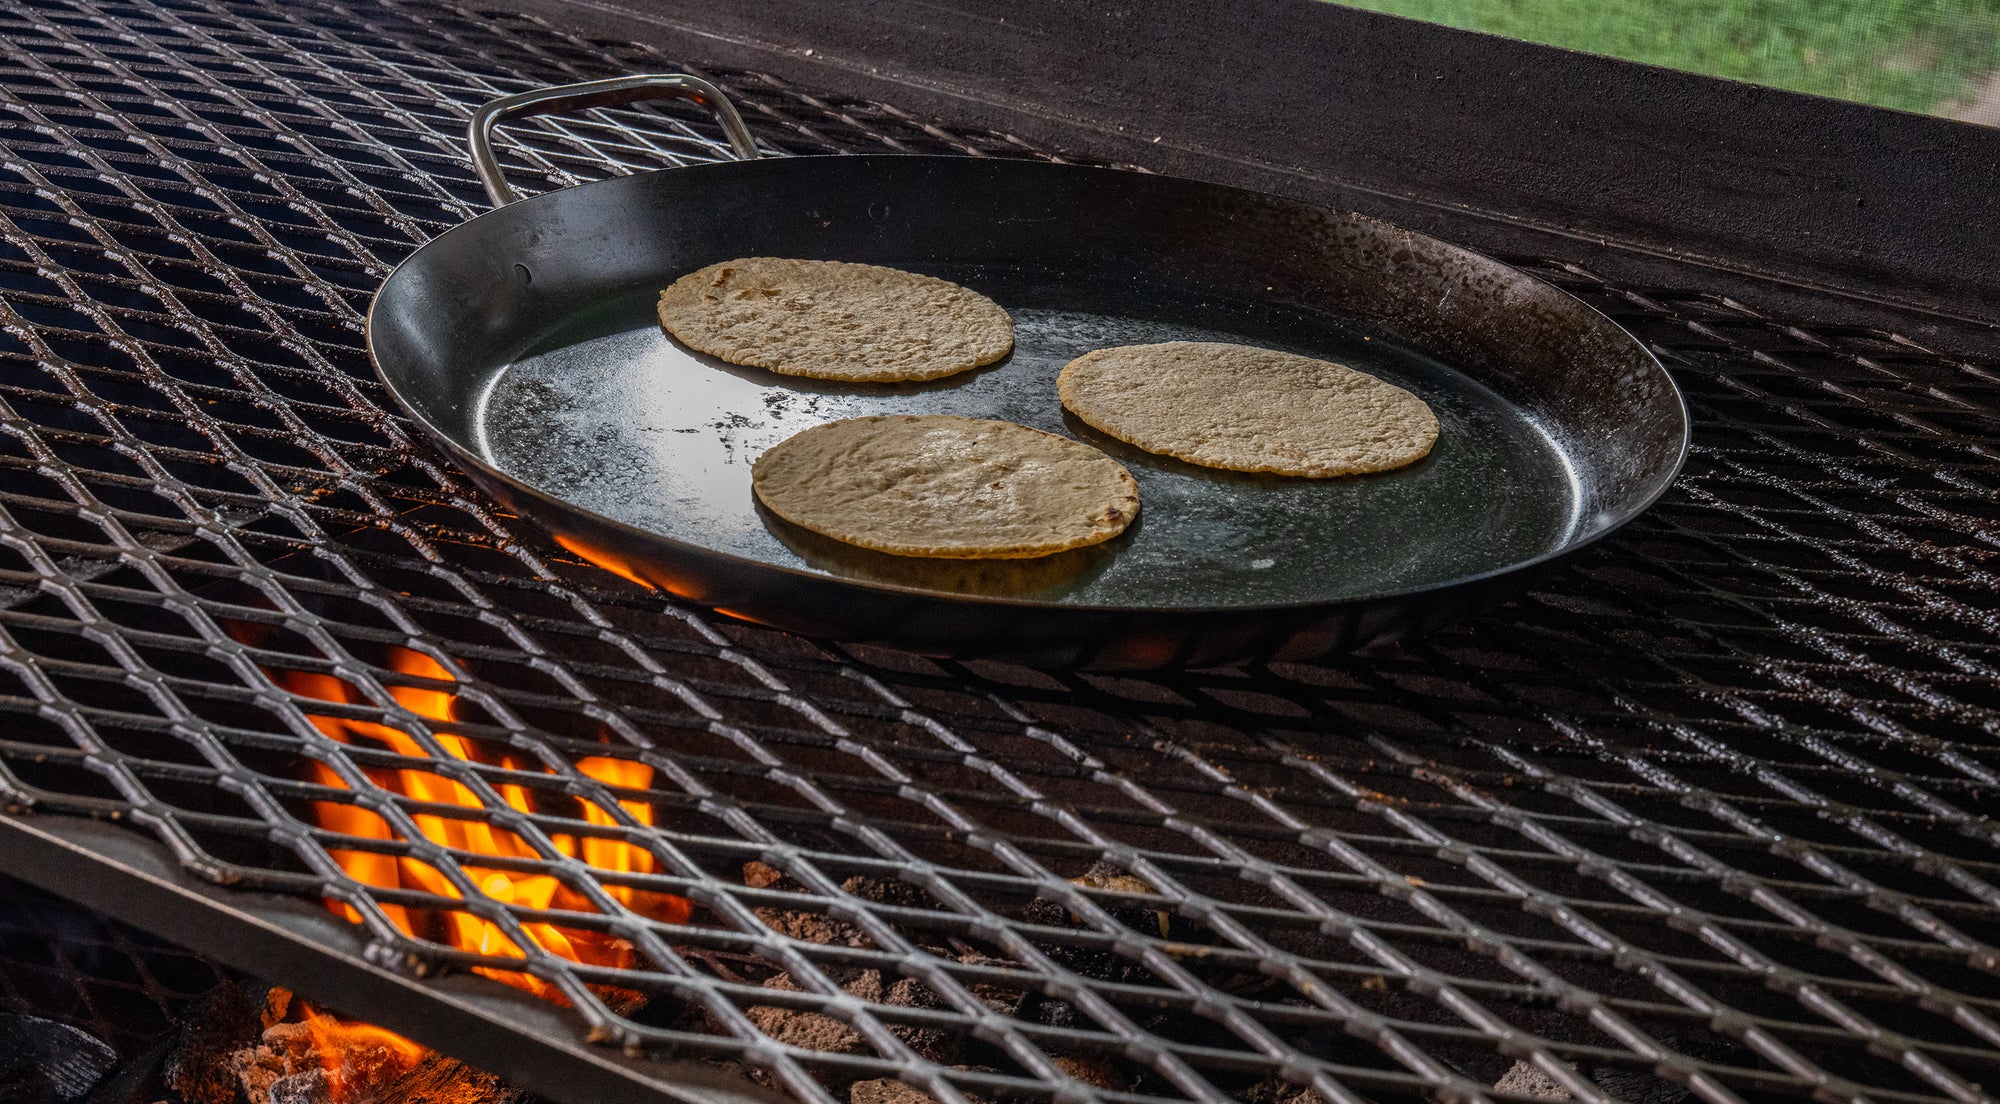 Comal with three tortillas on a grill 